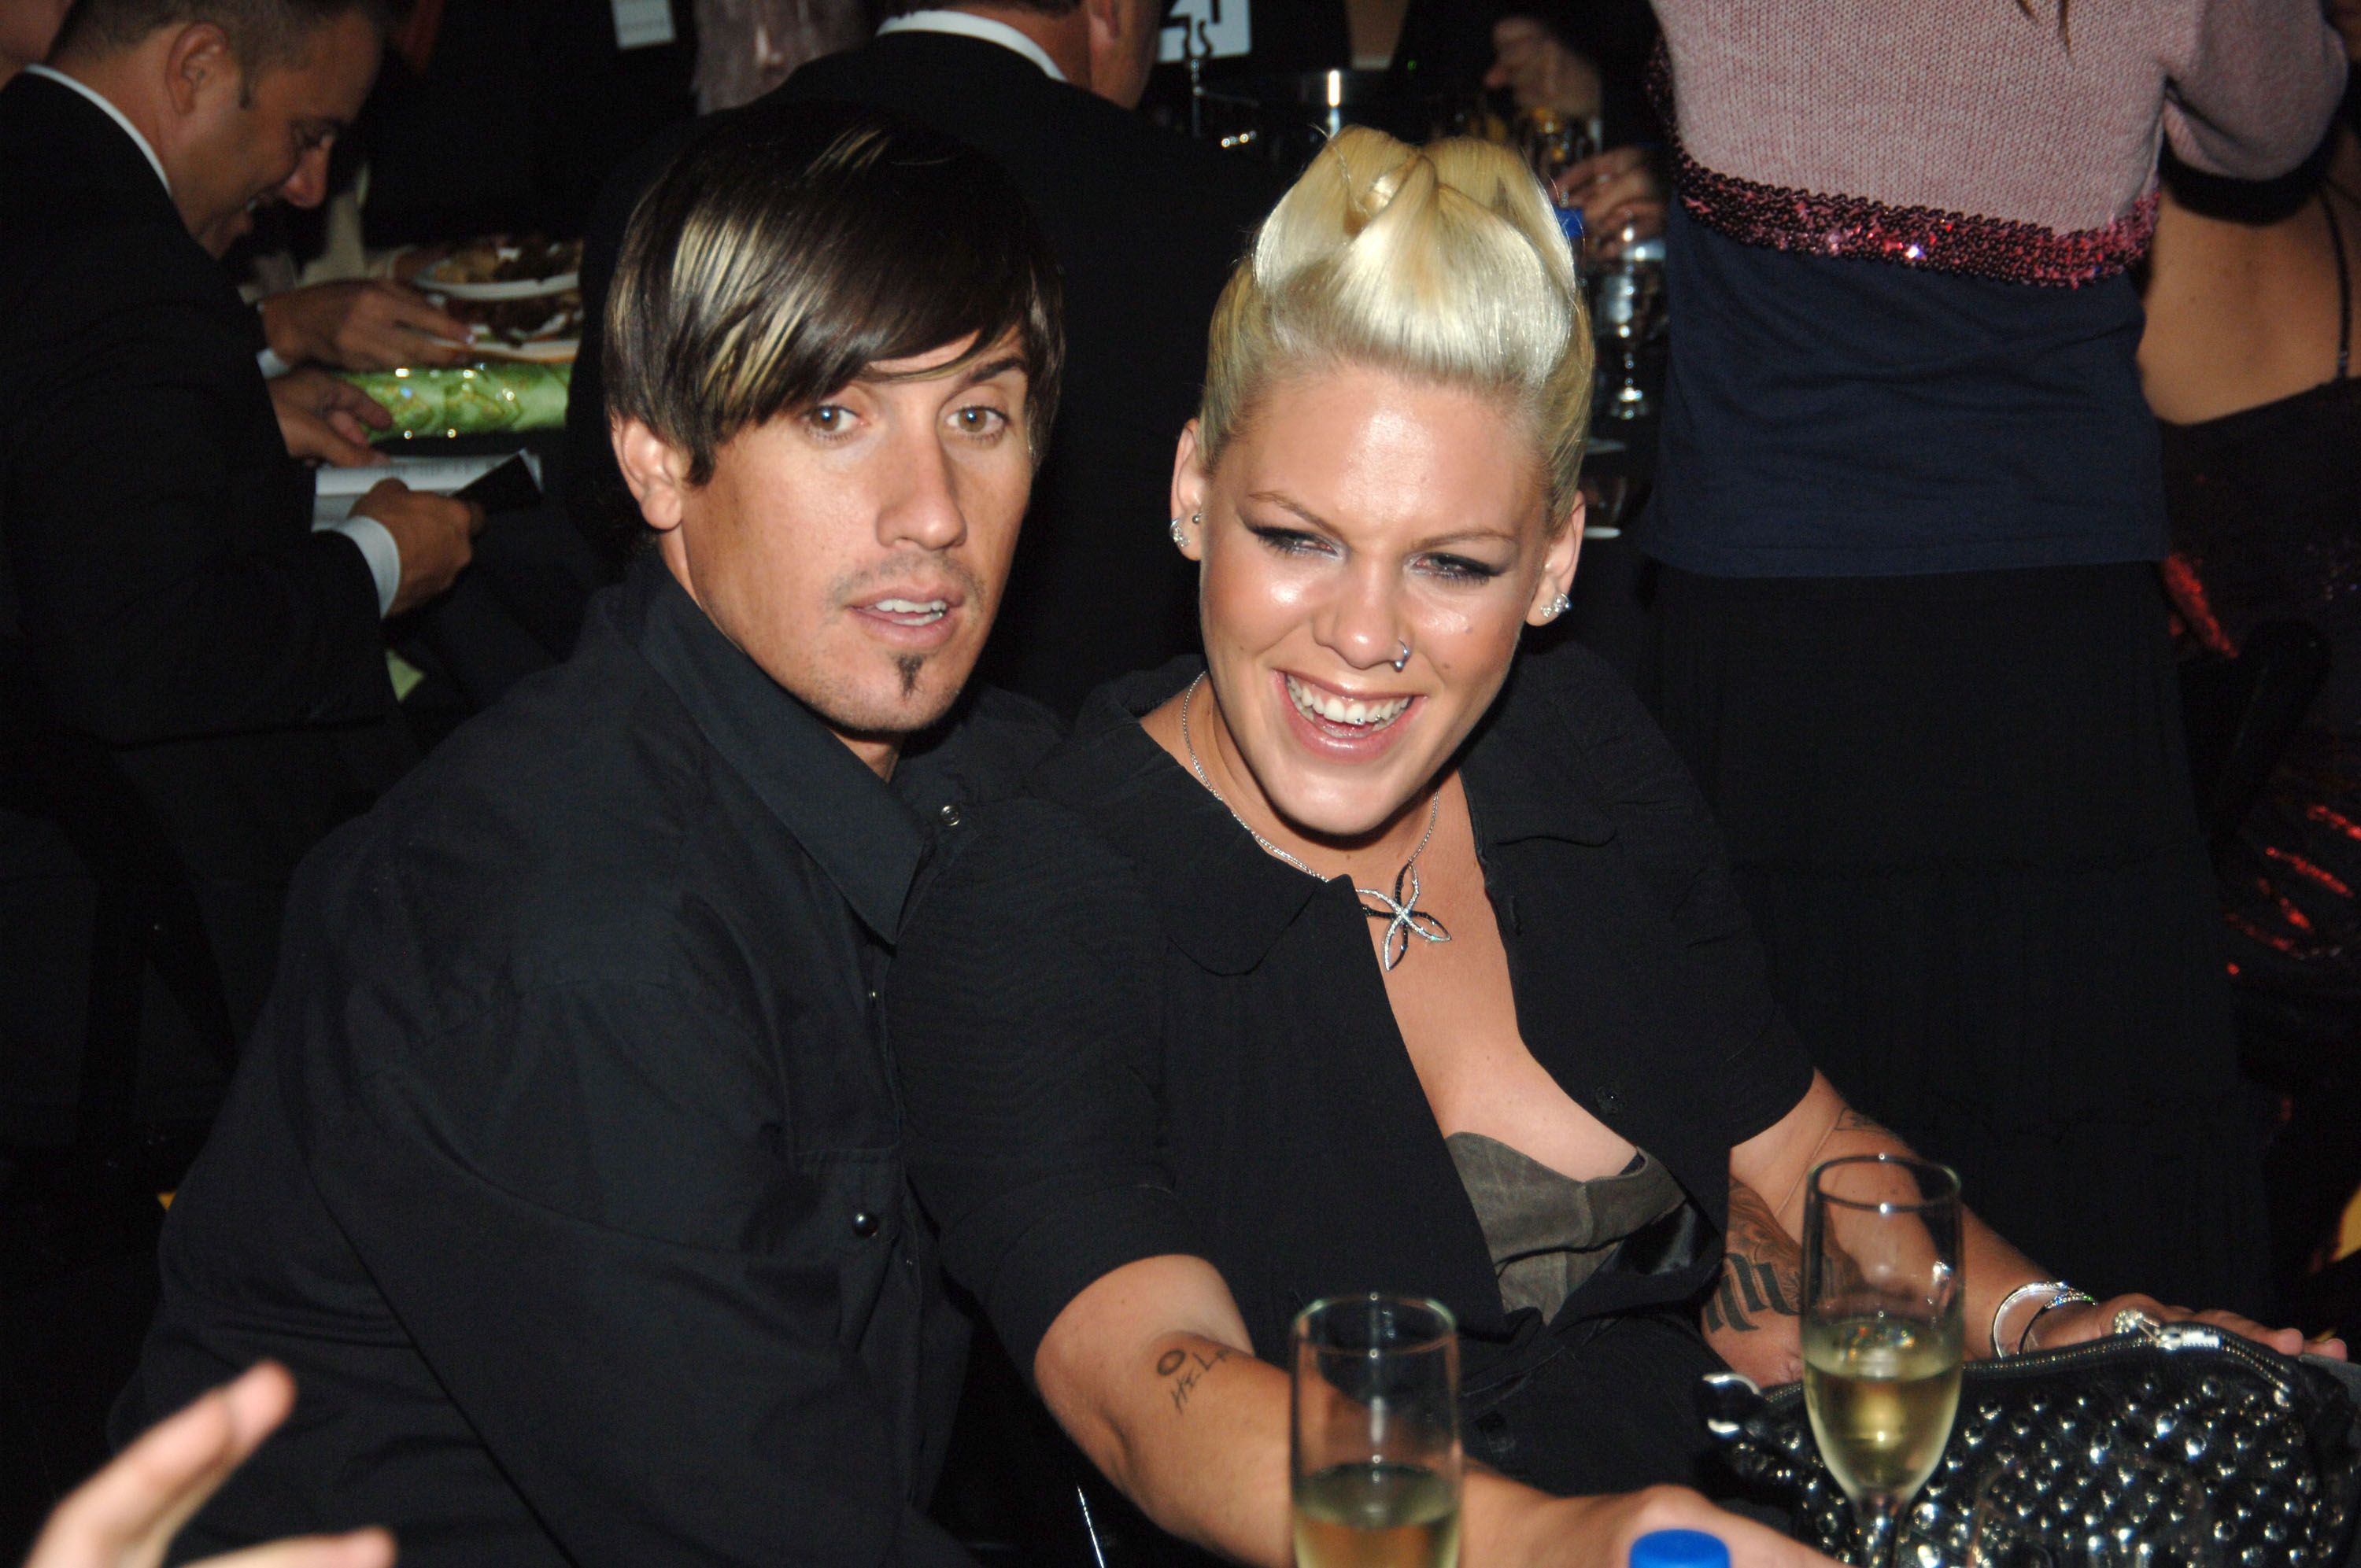 Carey Hart and Pink during 25th Anniversary Gala for PETA and Humanitarian Awards in Hollywood, California, on September 10, 2005. | Source: Jeff Kravitz/FilmMagic, Inc/Getty Images